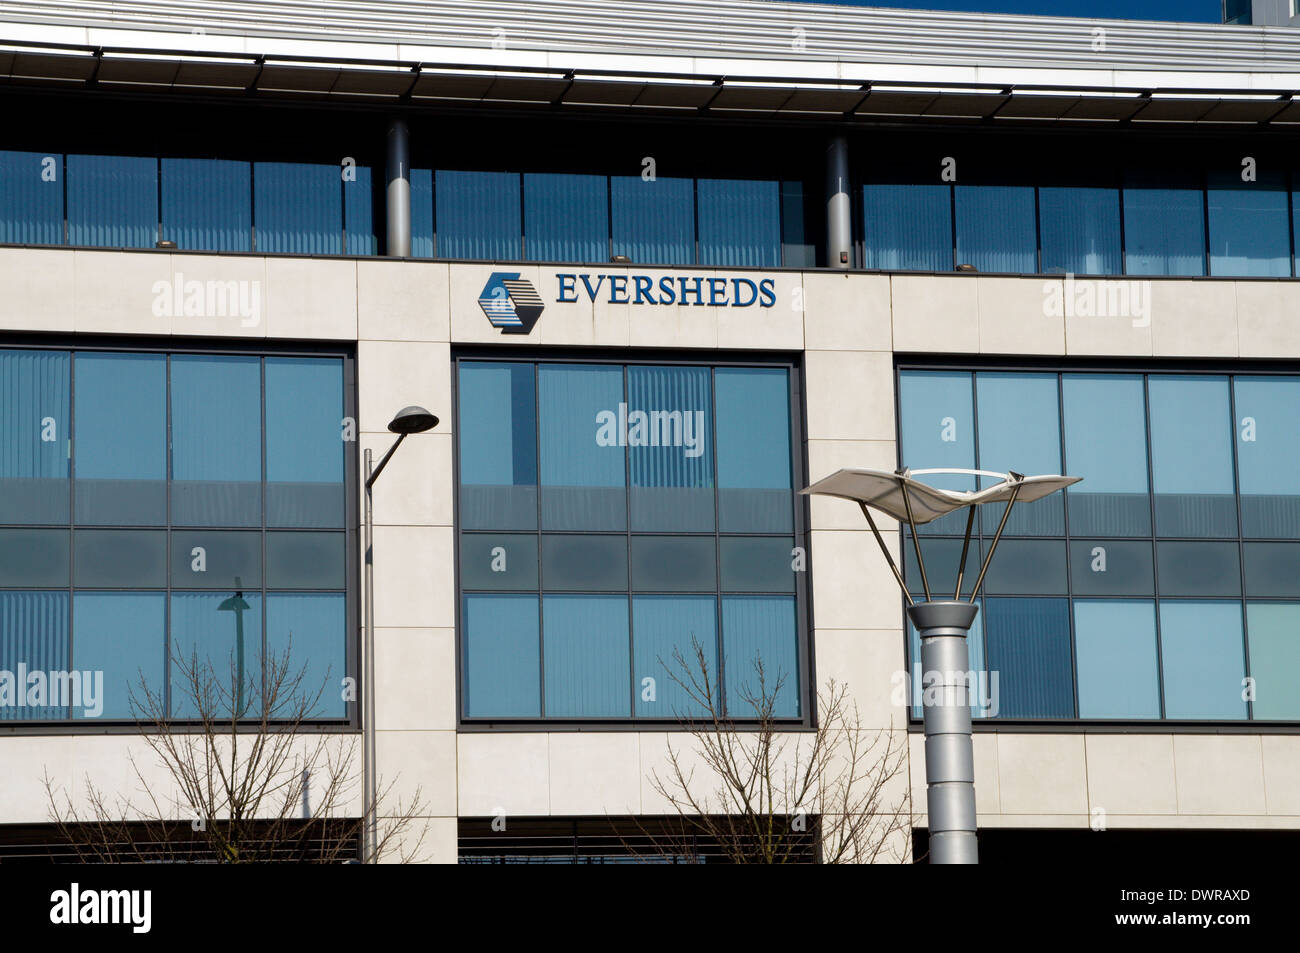 Eversheds Law Firm uffici, Callaghan Square, Cardiff, Galles. Foto Stock